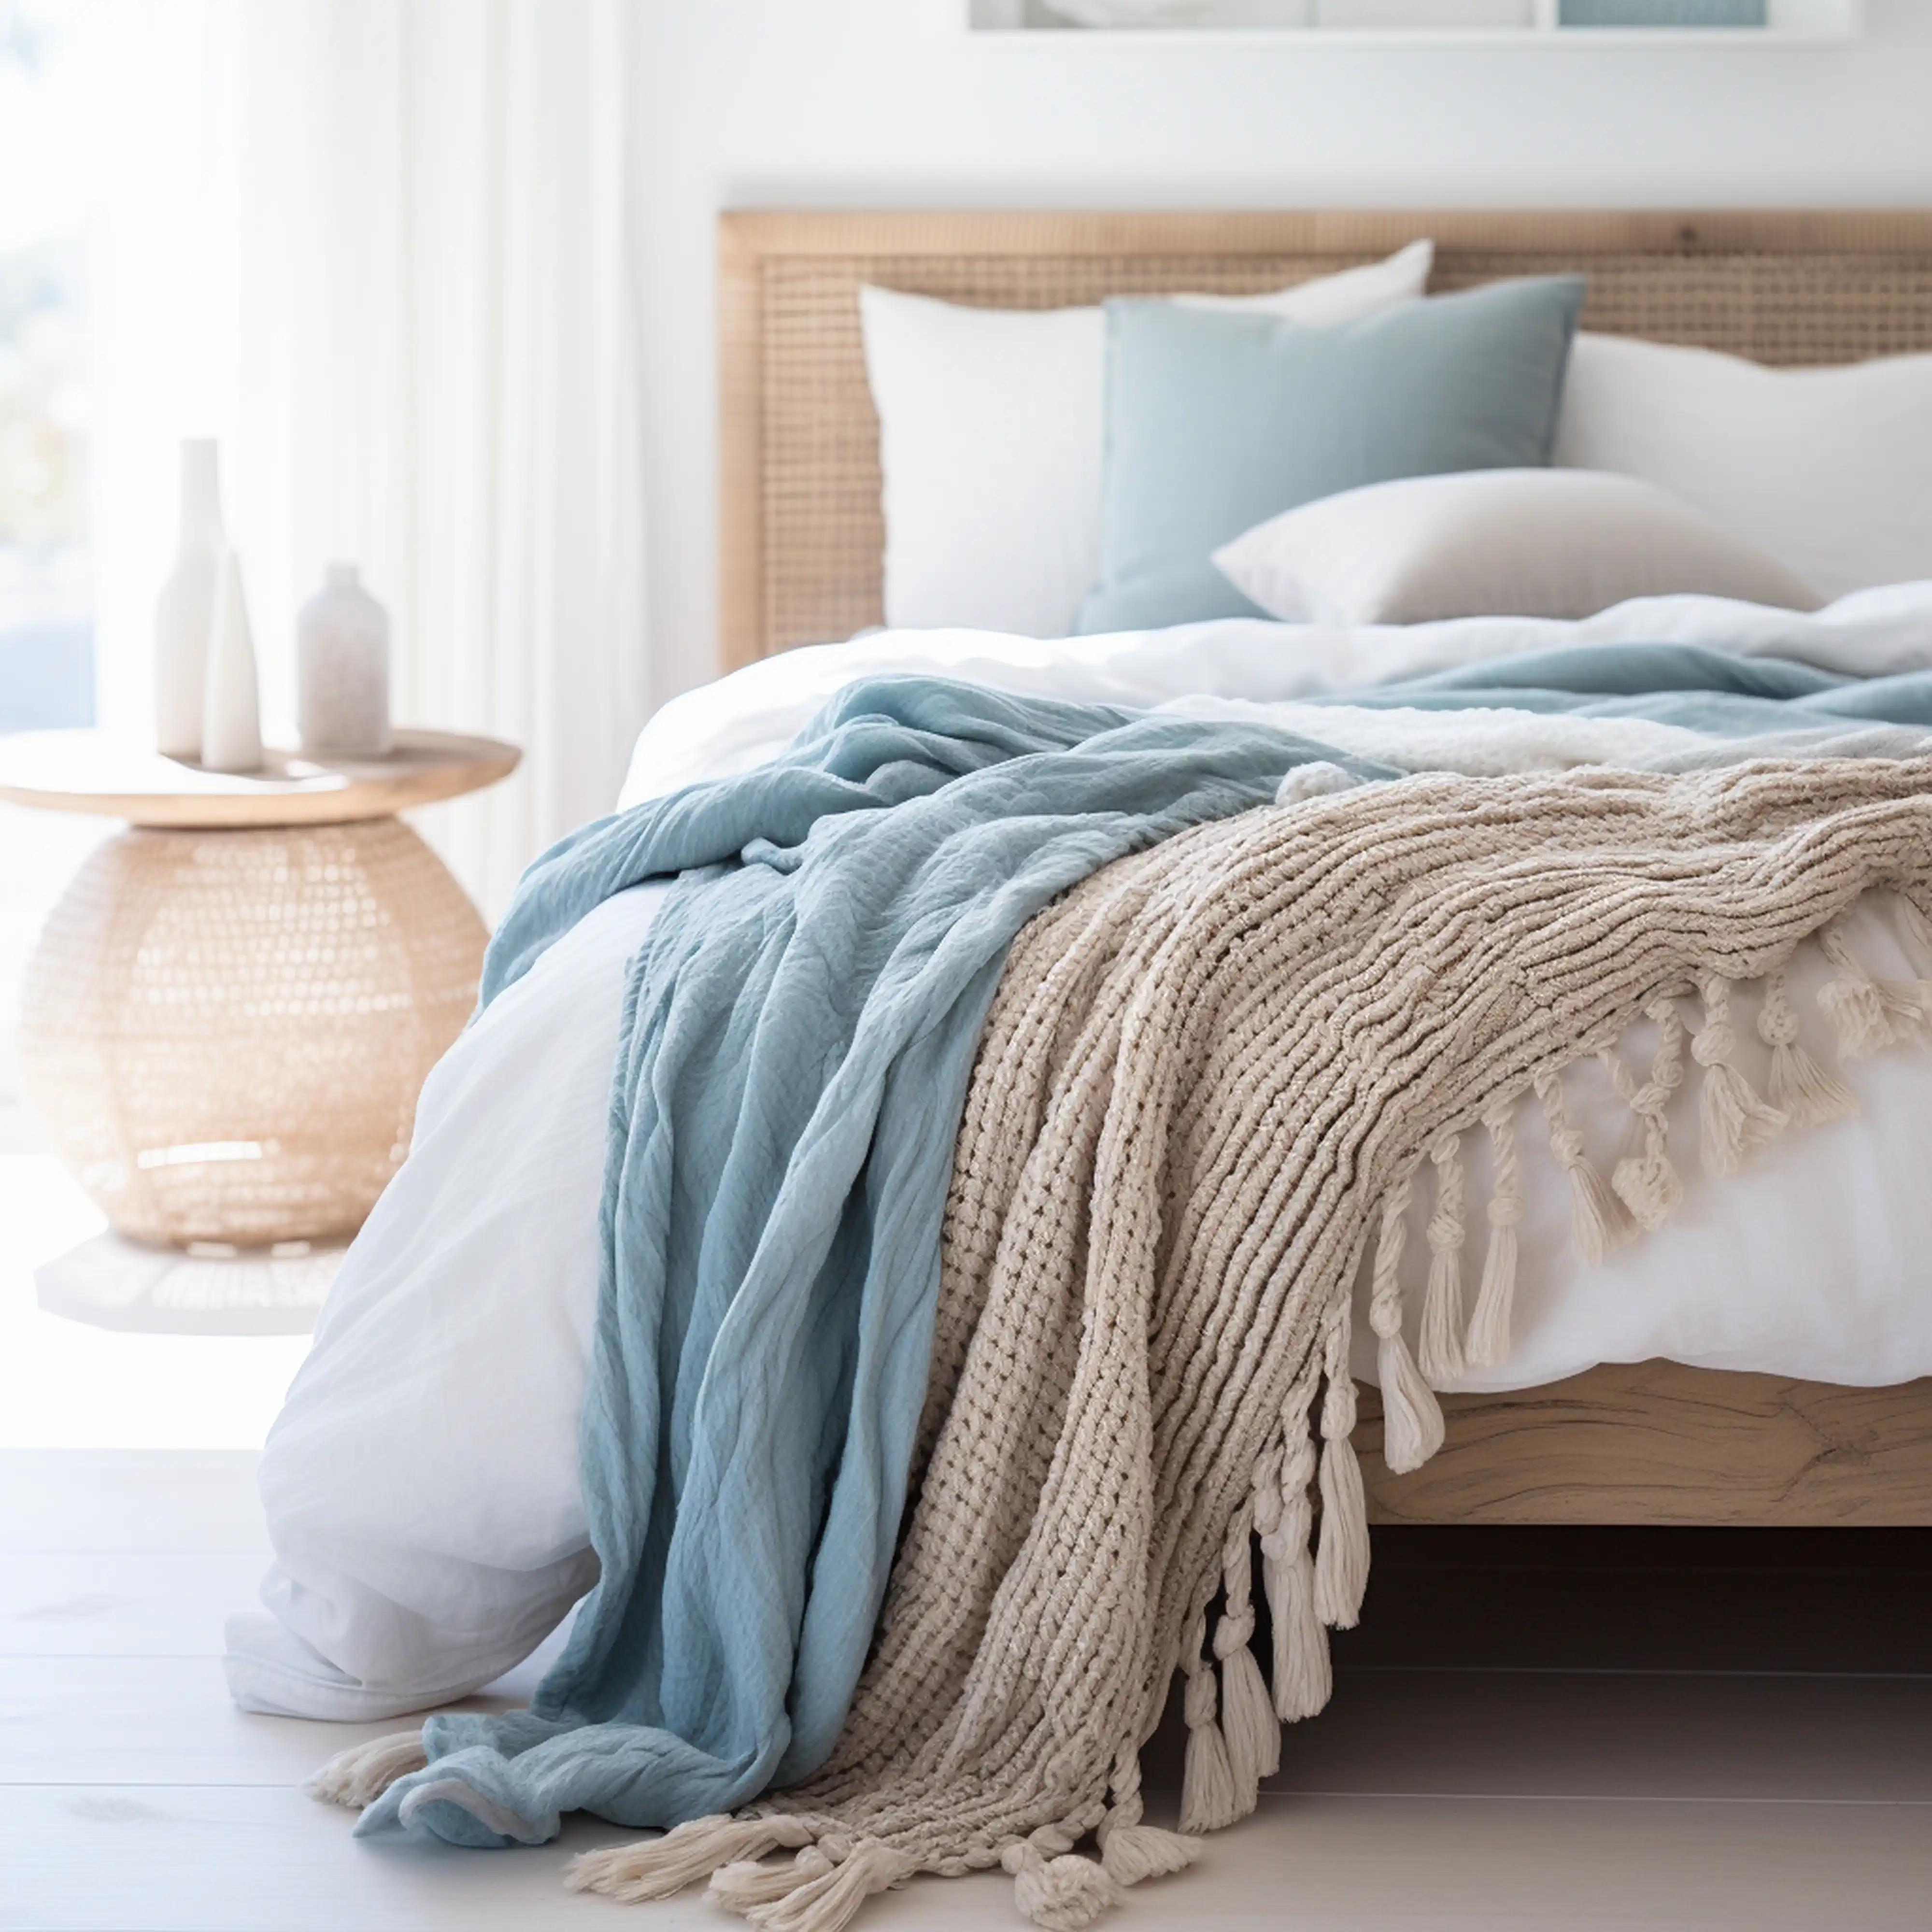 Serene bedroom with coastal decor featuring soft blue textiles and a knitted throw blanket, interior by Sarah Brown Design